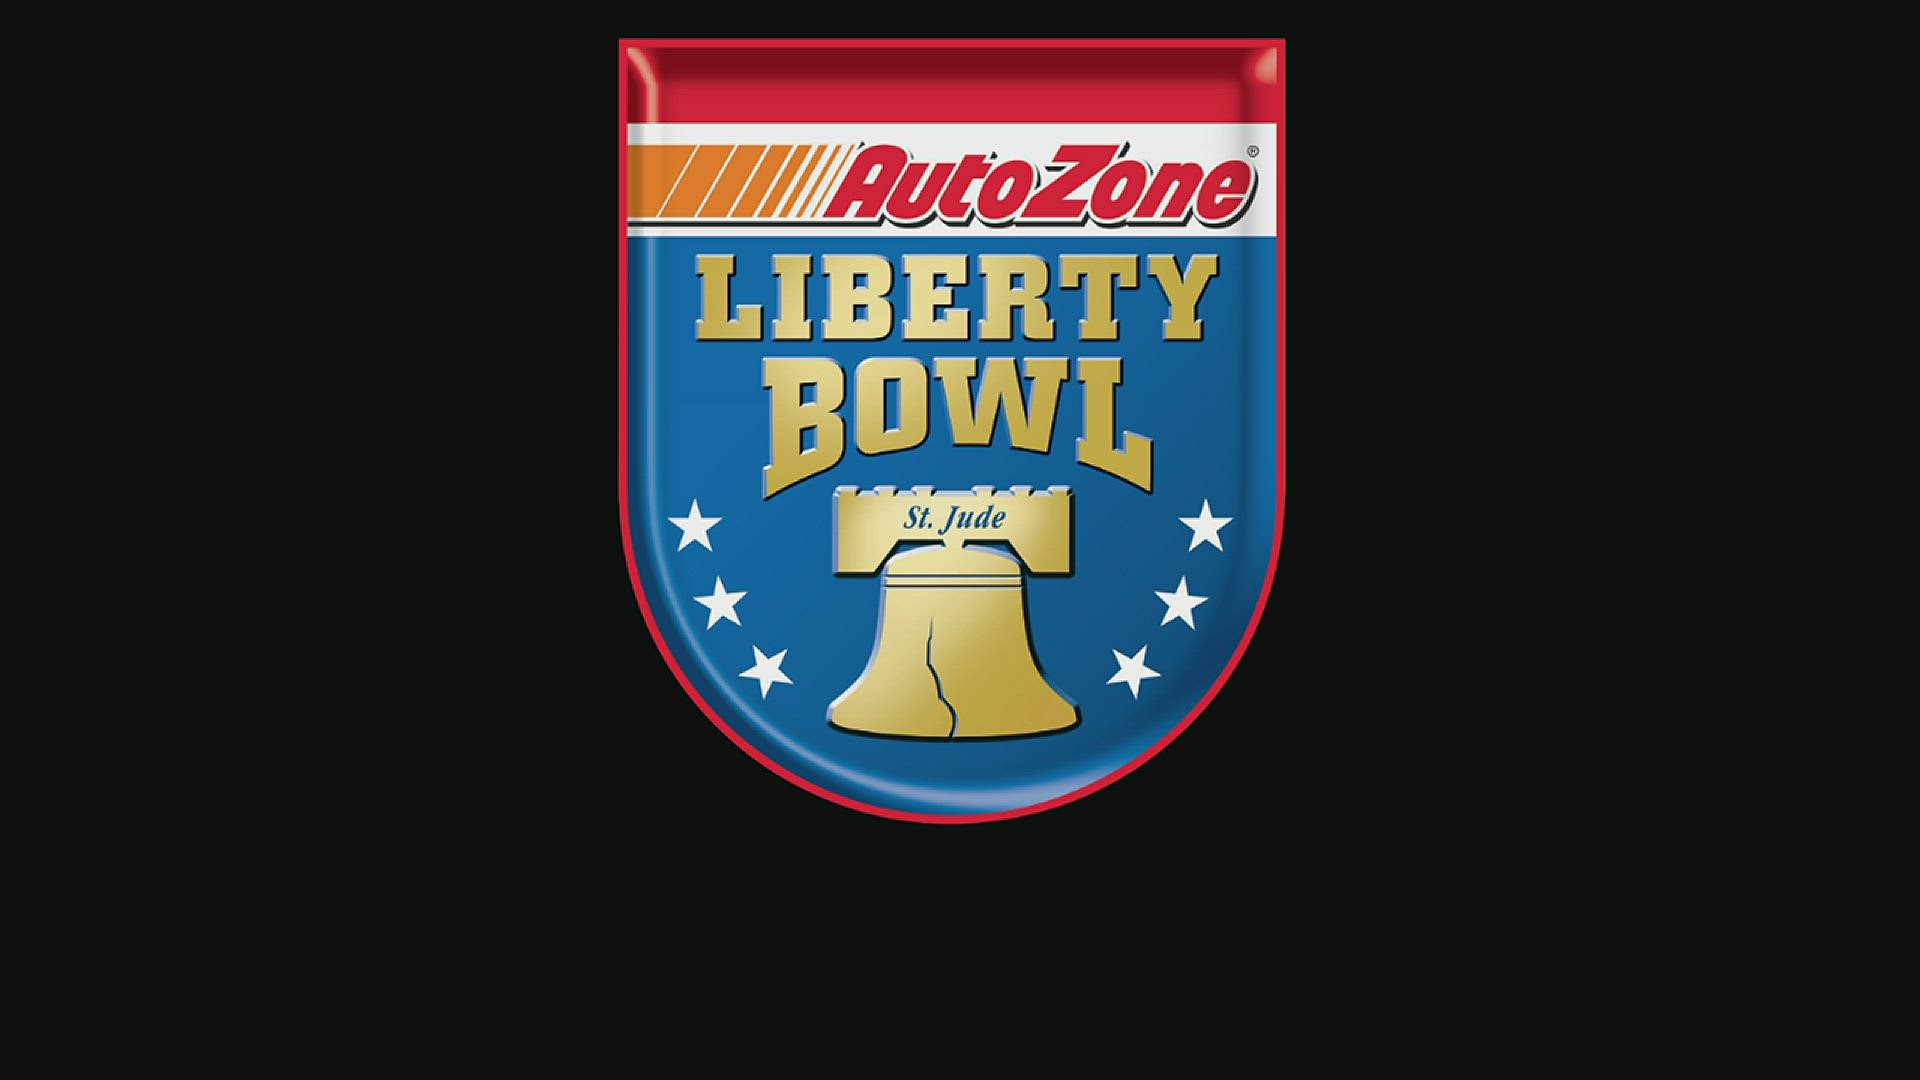 The 2022 AutoZone Liberty Bowl is honoring rock band Starship featuring Mickey Thomas with this year’s Outstanding Achievement Award